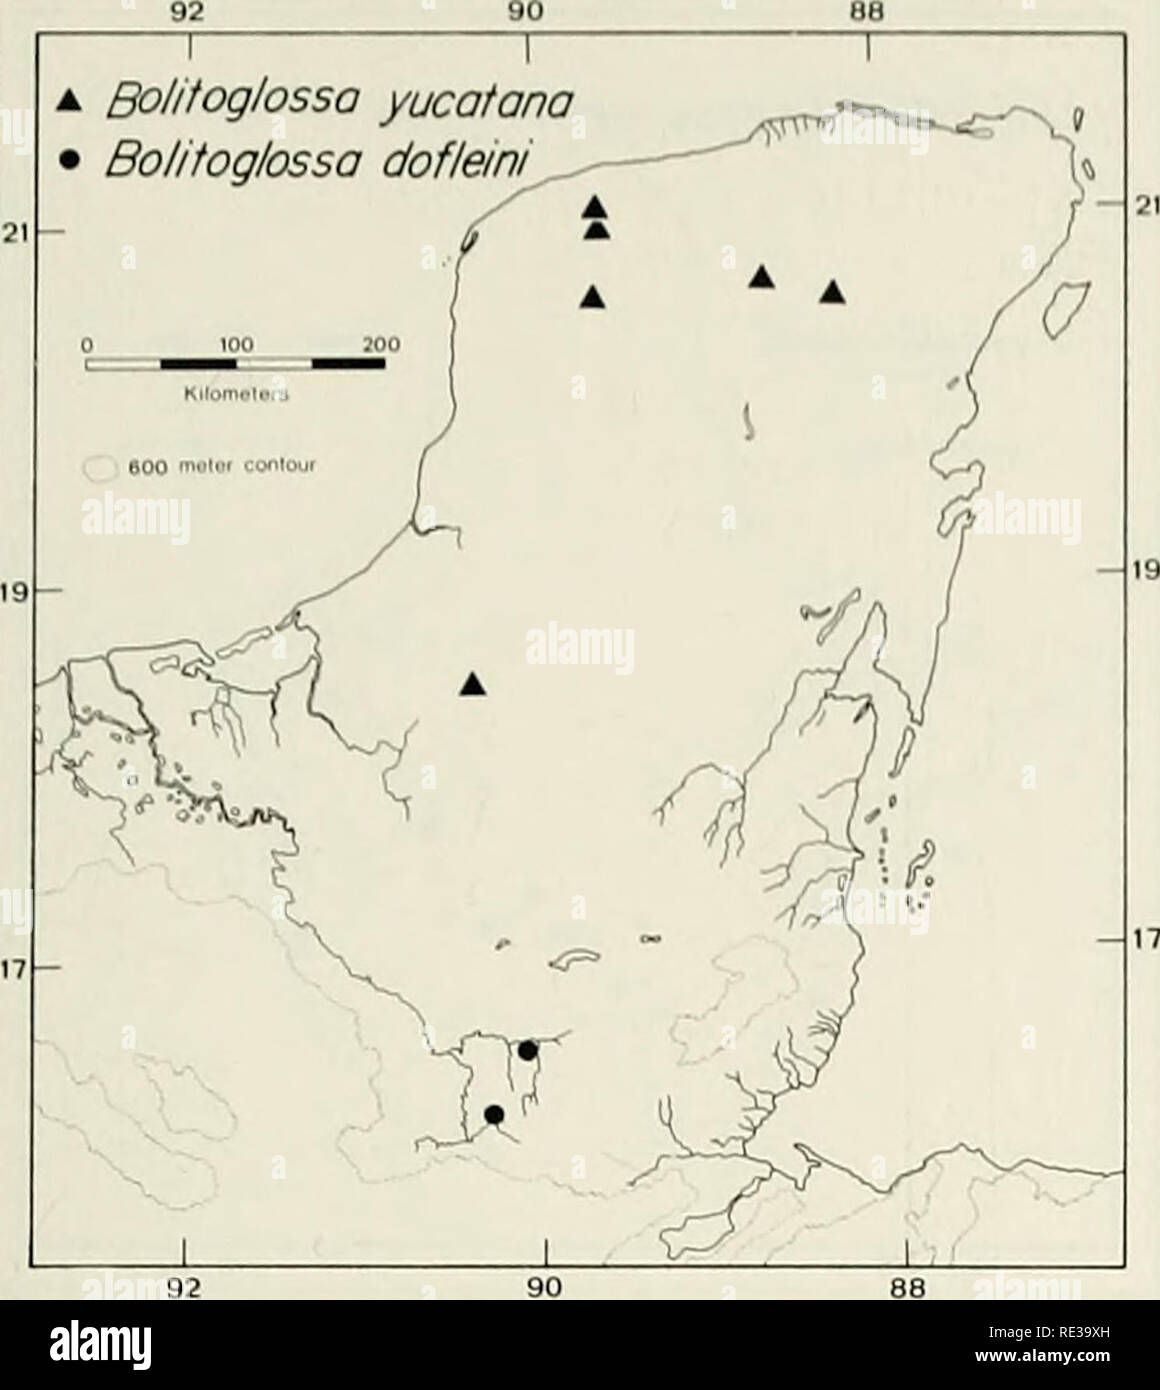 . An ecogeographic analysis of the herpetofauna of the Yucatan Peninsula. Amphibians; Amphibians; Reptiles; Reptiles. YUCATAN HERPETOFAUNA 49 A Bolitoglossa yucatana â¢ Bolitoglossa dofleini  . Bolitoglossa 1 rufescens 1 T ' Tzl- )  } /. - ^^ / P J - J^V Y / 7^ / ^^^ Â«?kÂ«s S / ^ ^' â â¢ ^ '&gt;'^ U â¢ c^ : â¢.â¢â¢ ^.^   1 1 Rhinophrynus dorsalis 1 --x*   /^ â¢ V Â° â¢*Â» '( /o j â¢  f y^ â¢ /   -f^^^^^'' ' ^ Ij ^zy**^Y ; j^'^WlSJtts 1 -( ' S * ^=W&quot; ;^ 1 â^ . Please note that these images are extracted from scanned page images that may have been digitally enhanced for readability - c Stock Photo